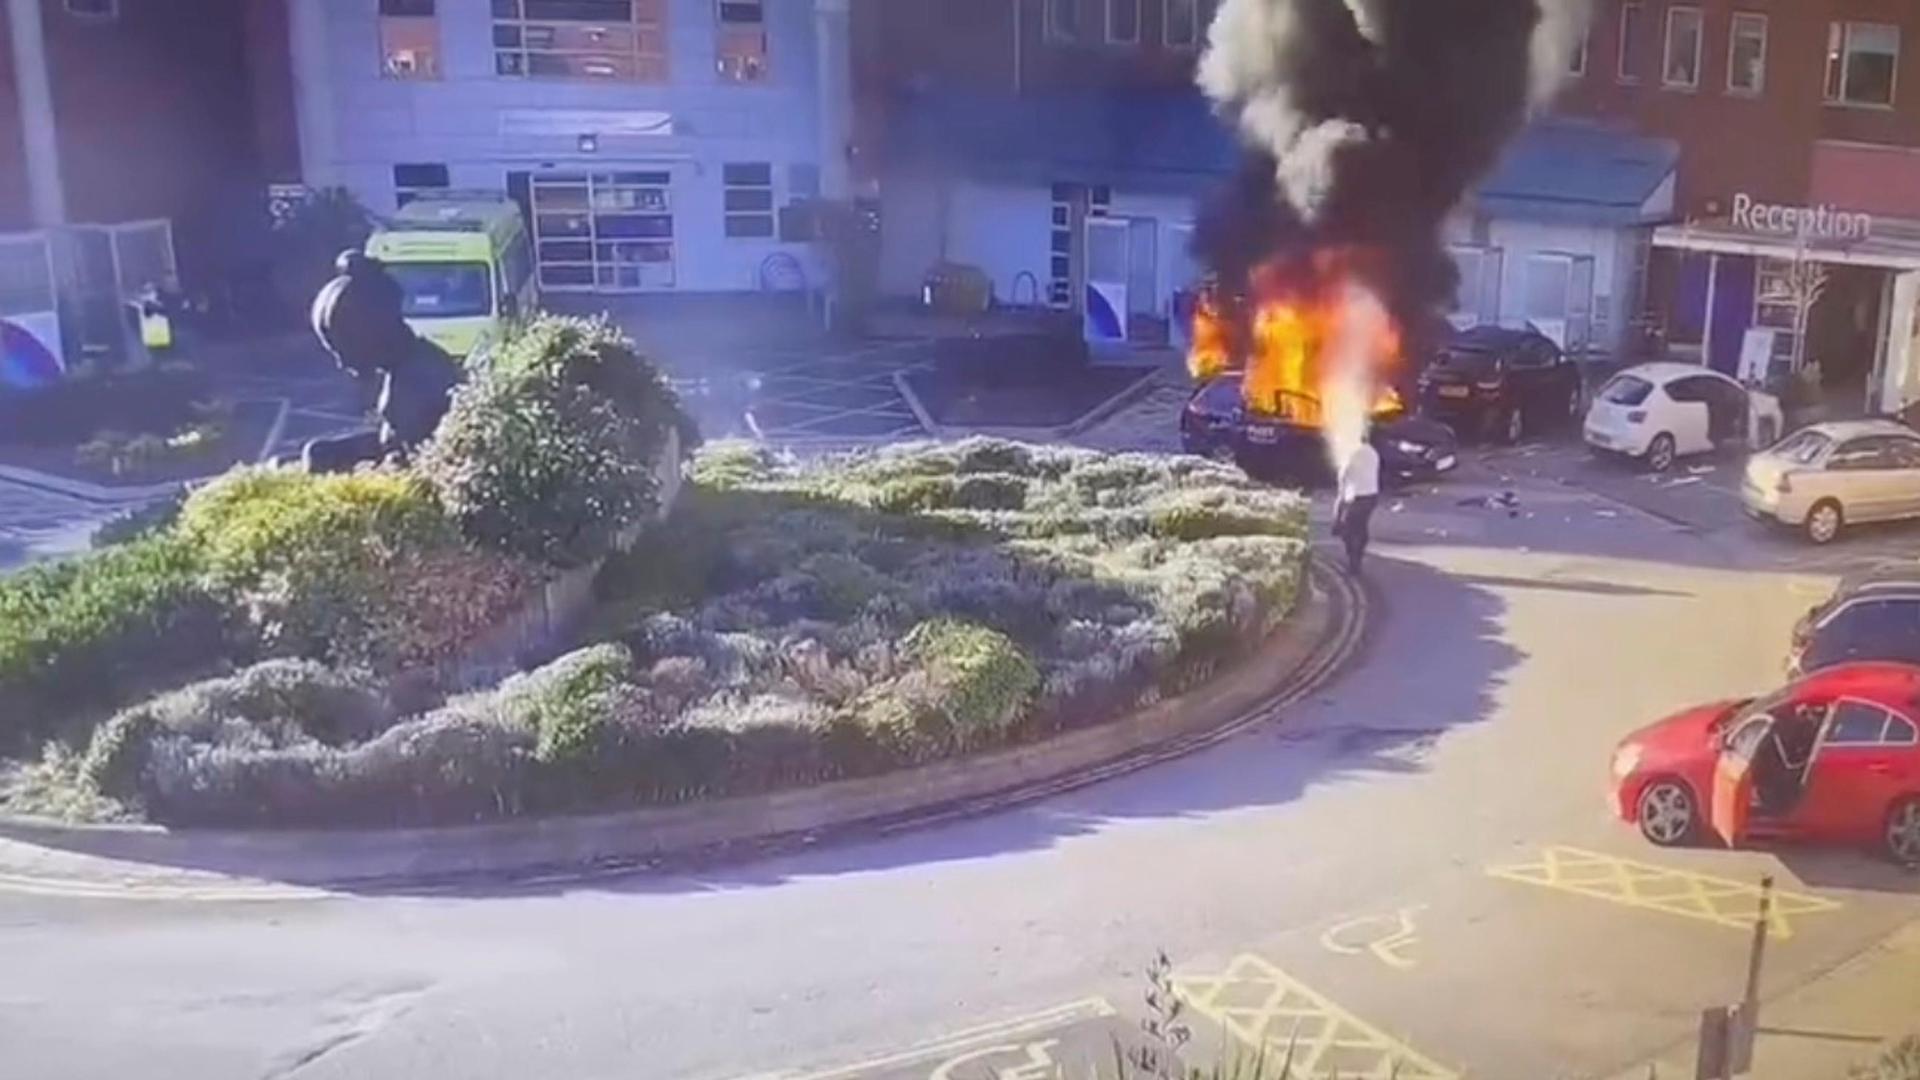 A surveillance camera footage shows a man extinguishing a burning taxi following an explosion, outside Liverpool Women's hospital in Liverpool, Britain November 14, 2021 in this still image obtained from a video on November 15, 2021. CCTV/via REUTERS THIS IMAGE HAS BEEN SUPPLIED BY A THIRD PARTY. NO RESALES. NO ARCHIVES.